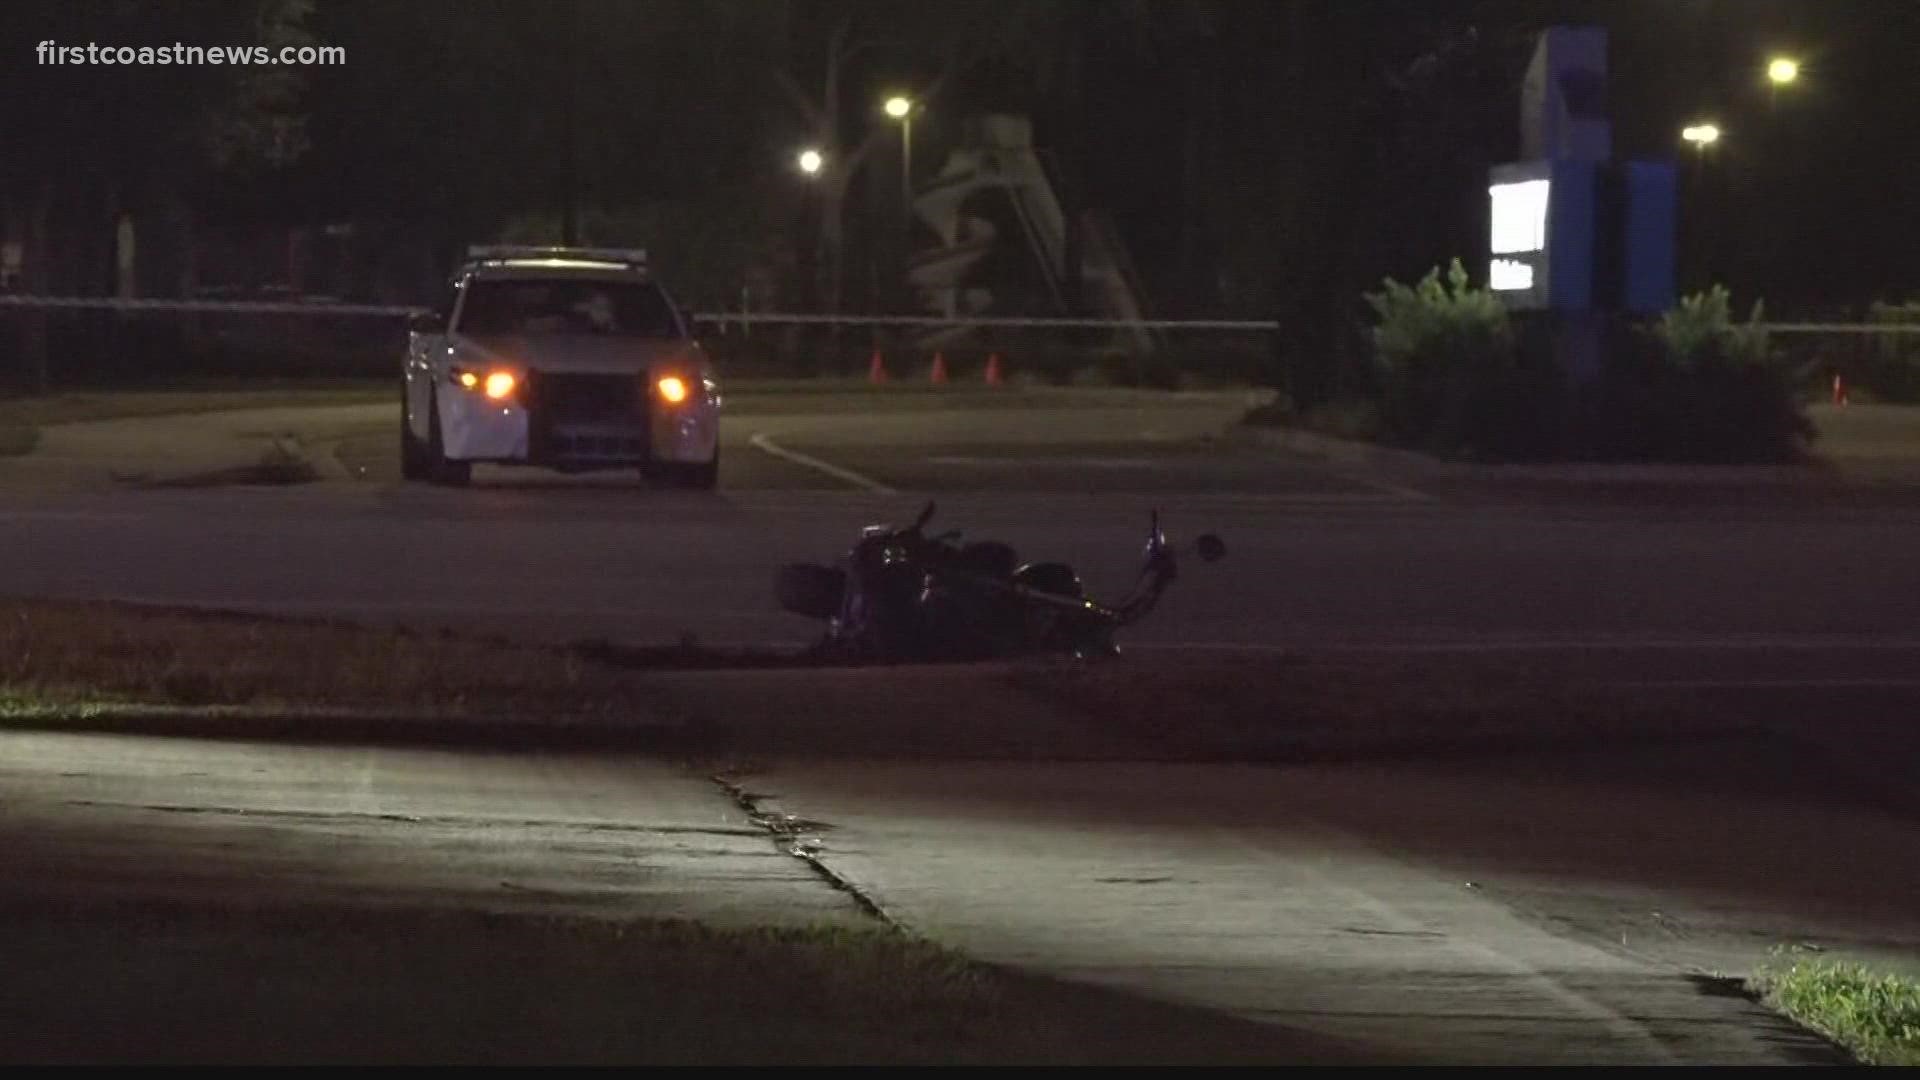 The crash happened at about 9 p.m. at the intersection of Romana Boulevard West and Hammond Boulevard.